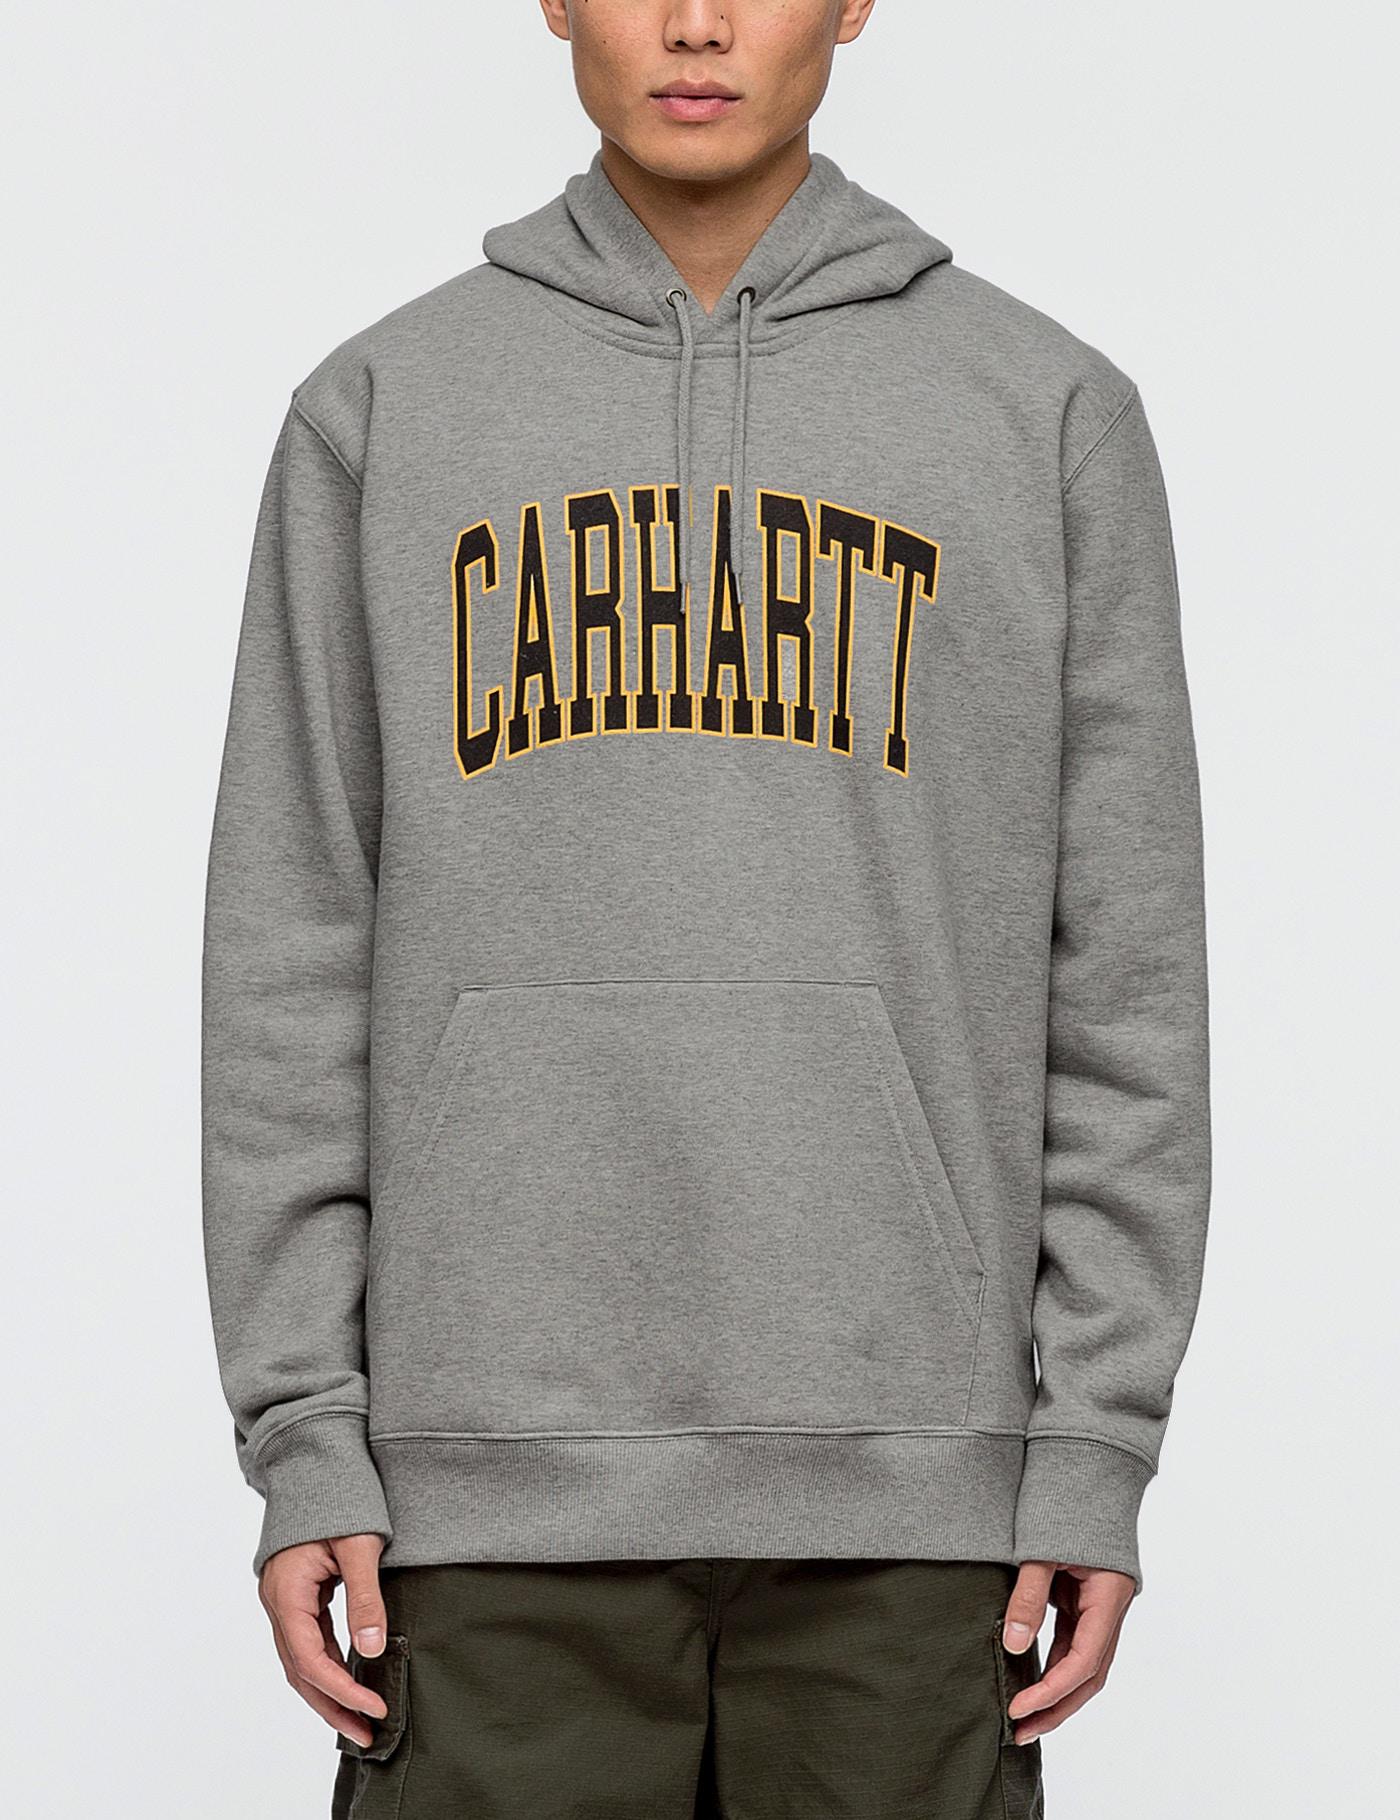 Carhartt WIP Cotton Division Hoodie in Grey Heather (Gray) for Men - Lyst